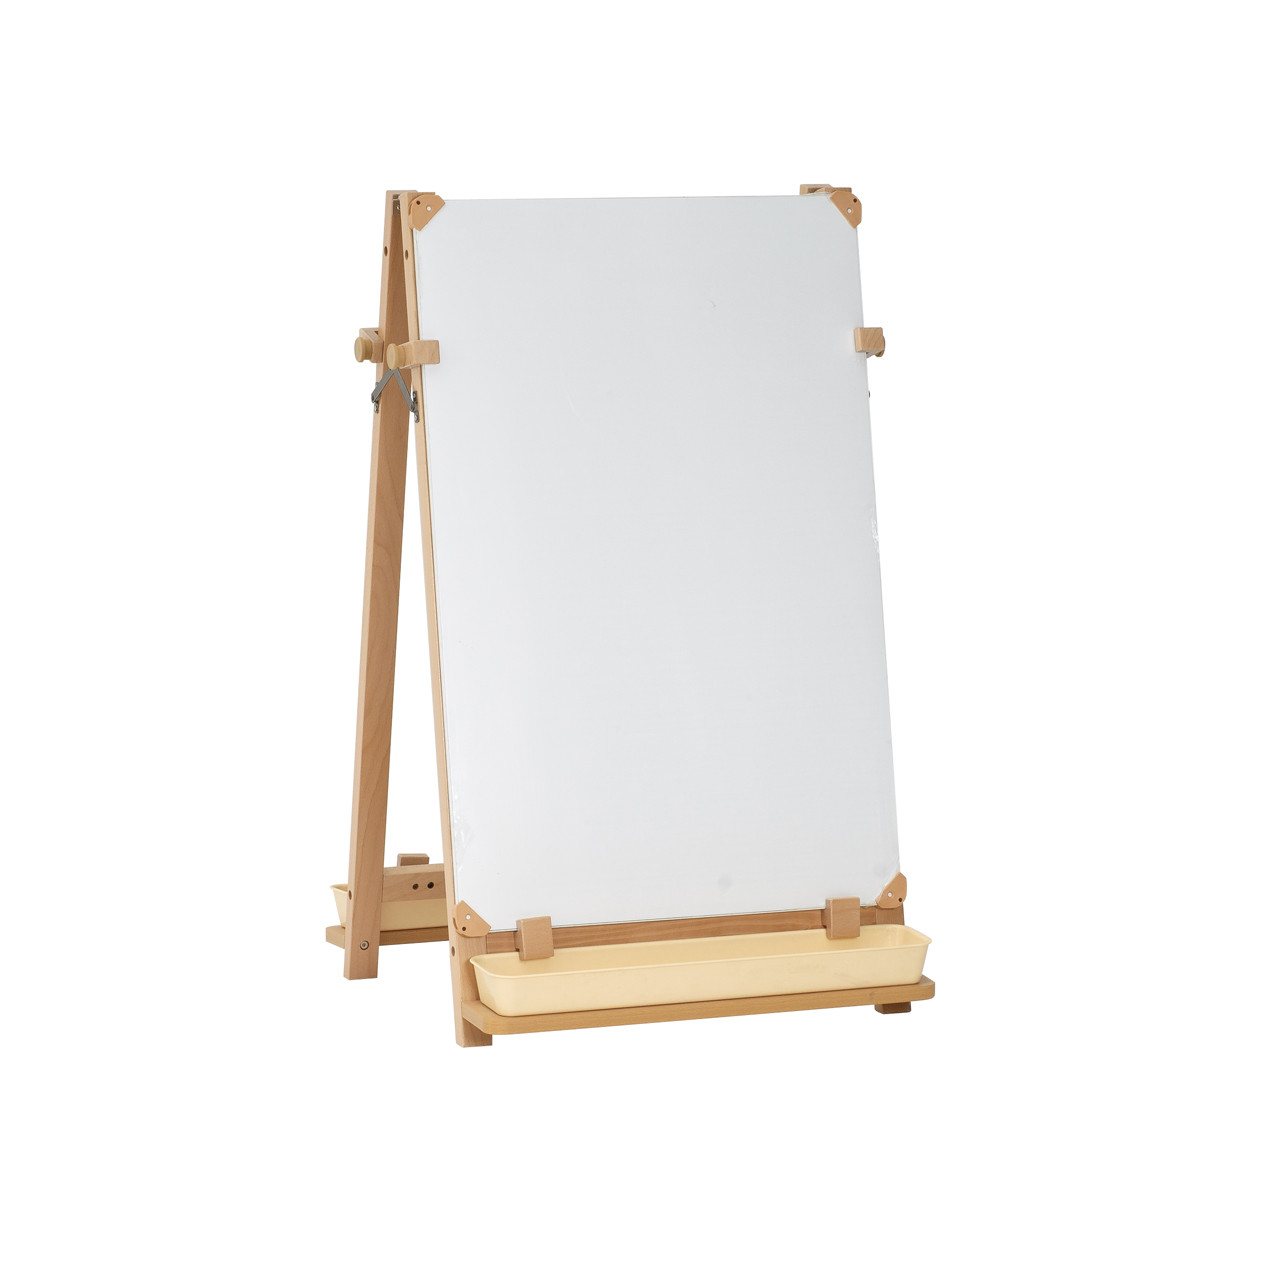 Fortbois Mordern Mini Easel Stand, For Display at Rs 34.5/piece in